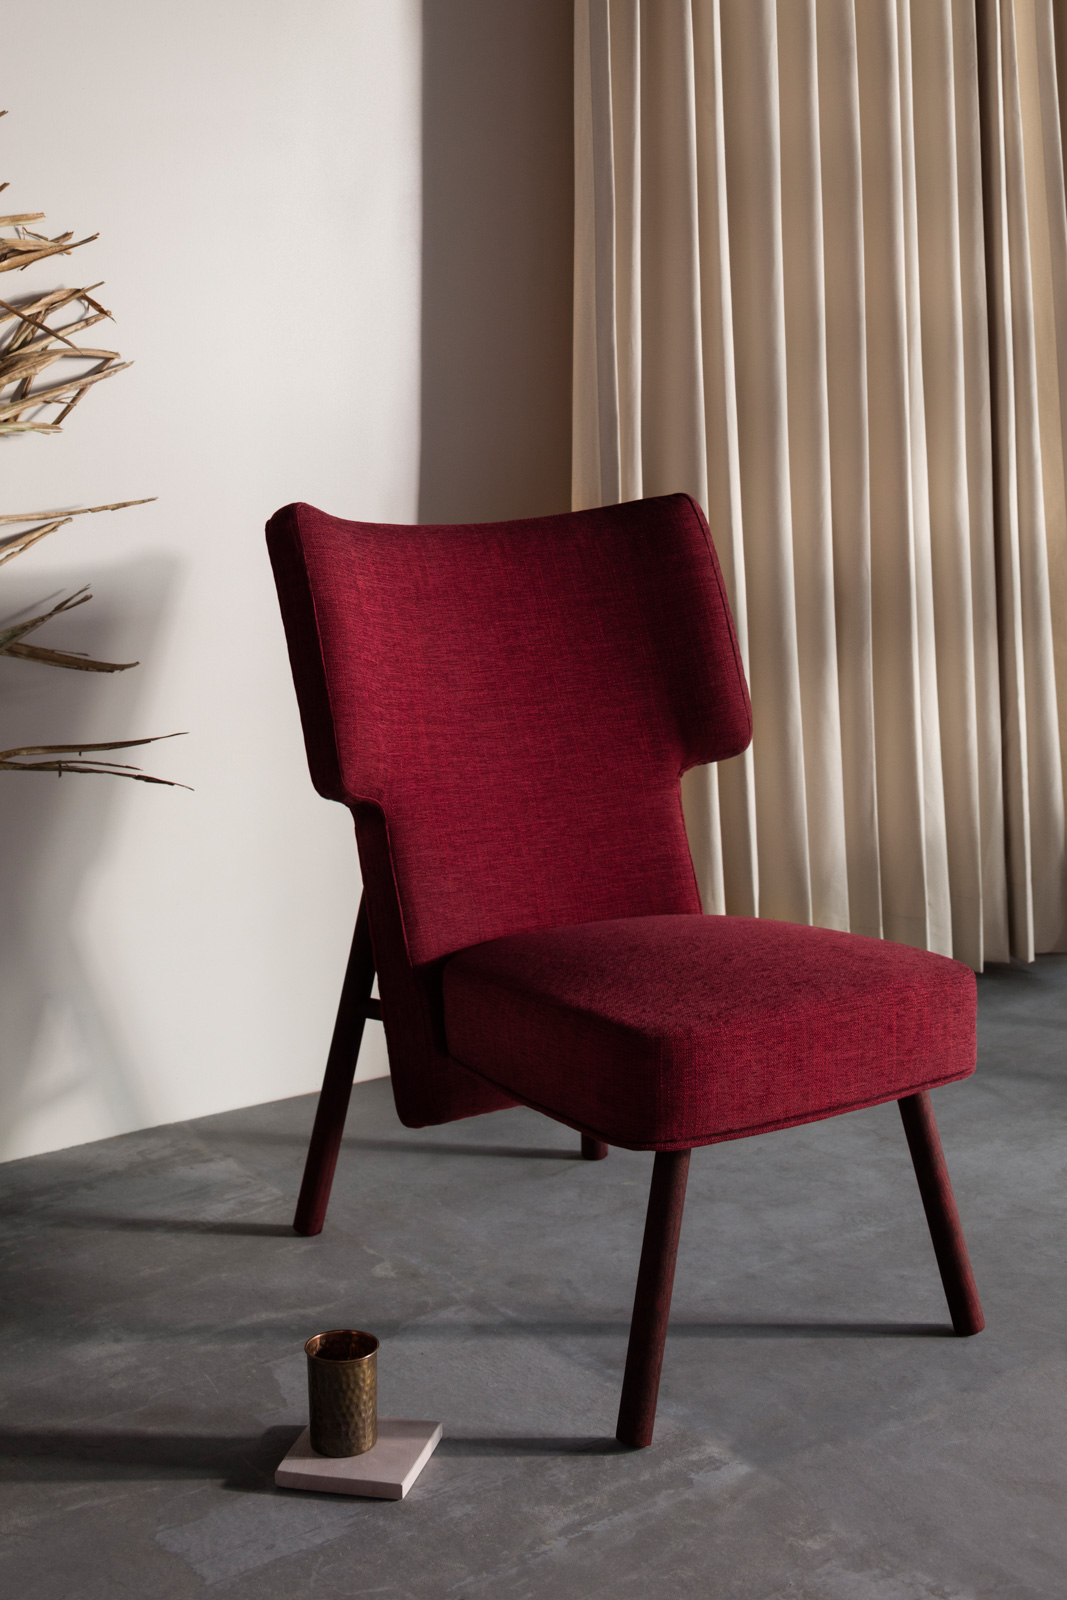 With a curved backrest, soft cushioning in a dual-tone combination of shiraz and scarlet, and red-stained wooden legs, the ‘Aza’ lounge chair by Quentin Voung from France is all about clean, modern design.